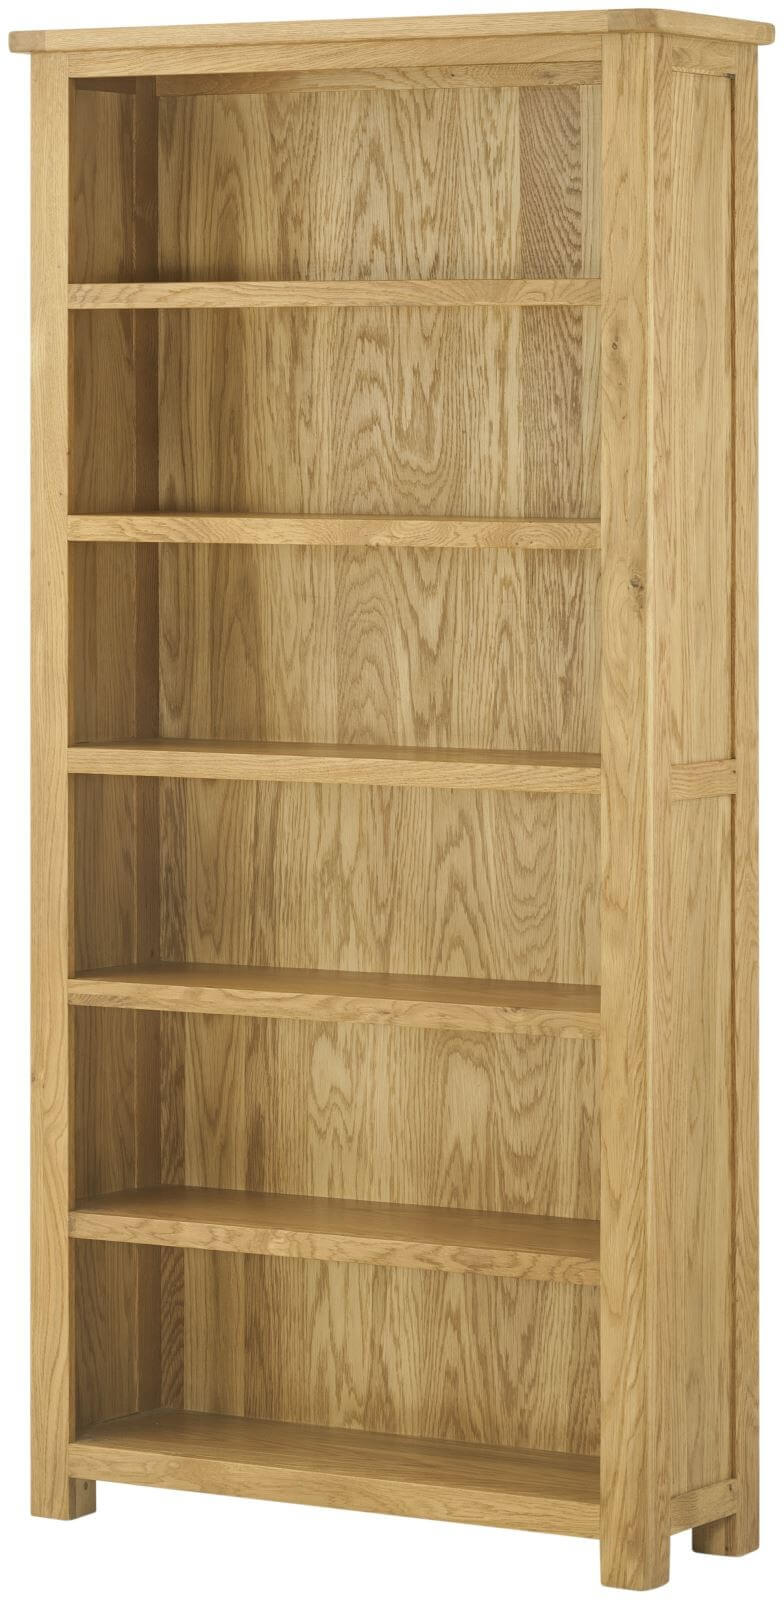 Showing image for Seattle bookcase - large